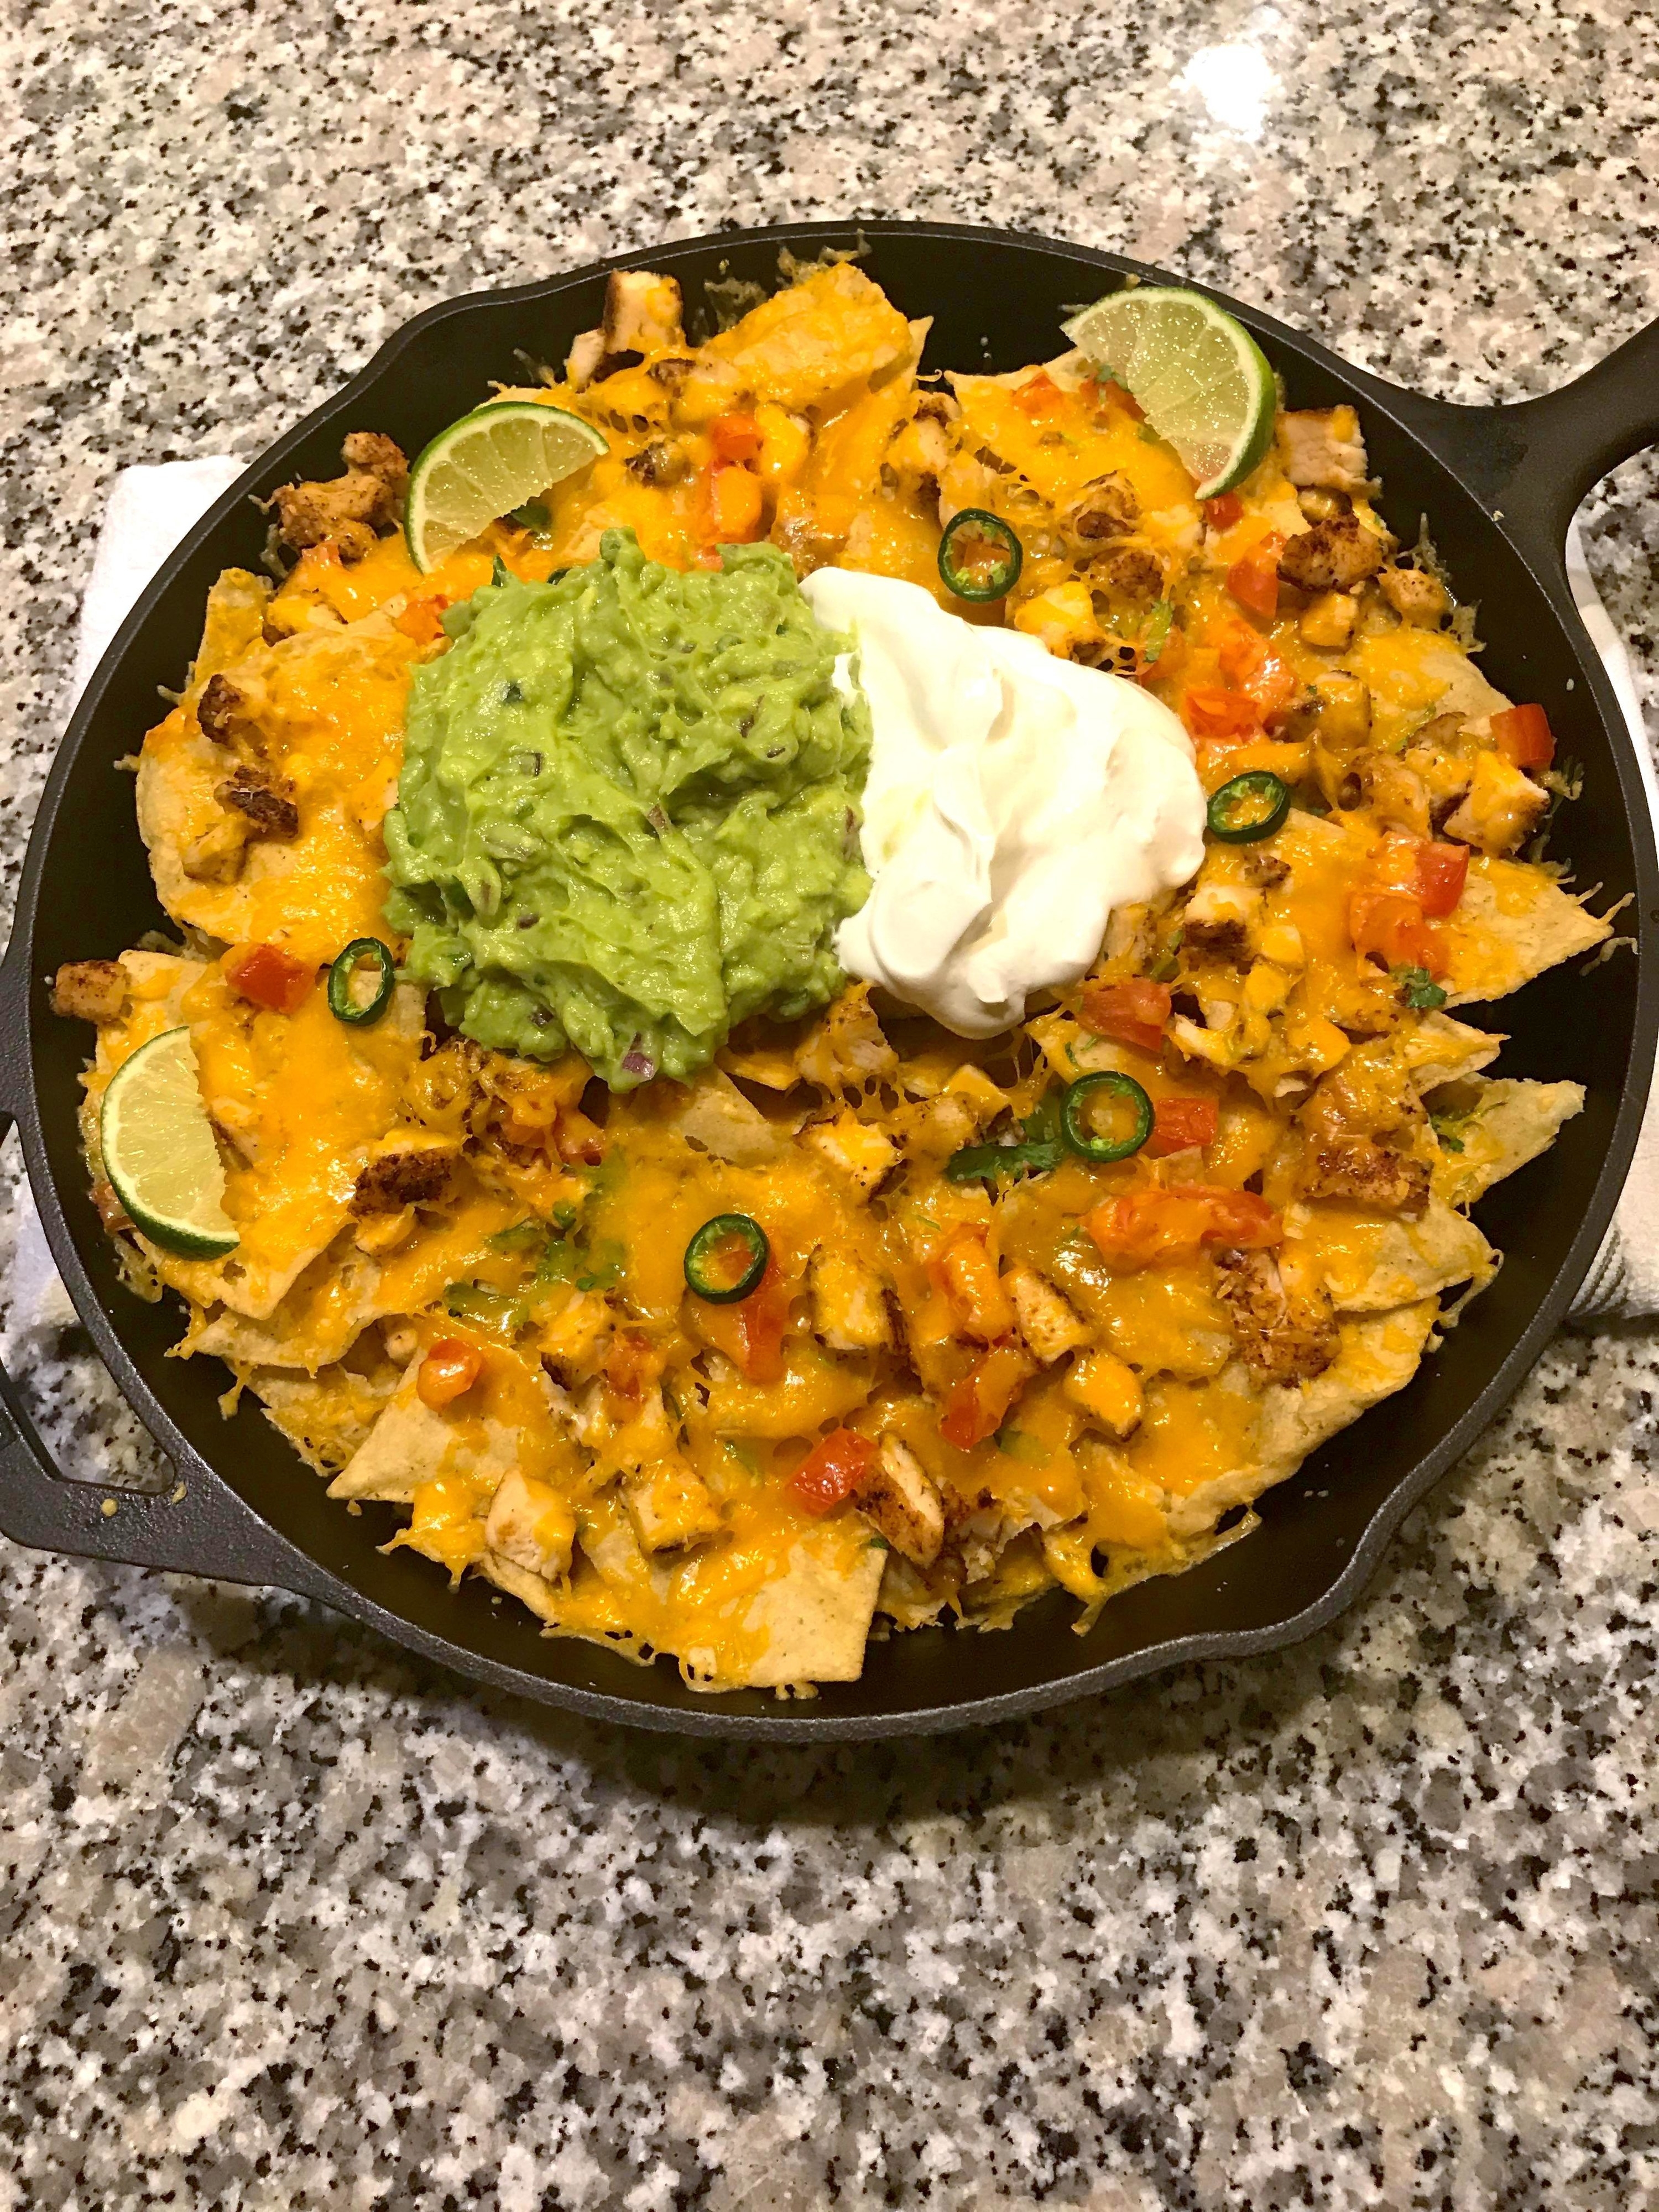 cast iron skillet full of blackened chicken nachos, served with lime wedges, guacamole, and sour cream in the middle